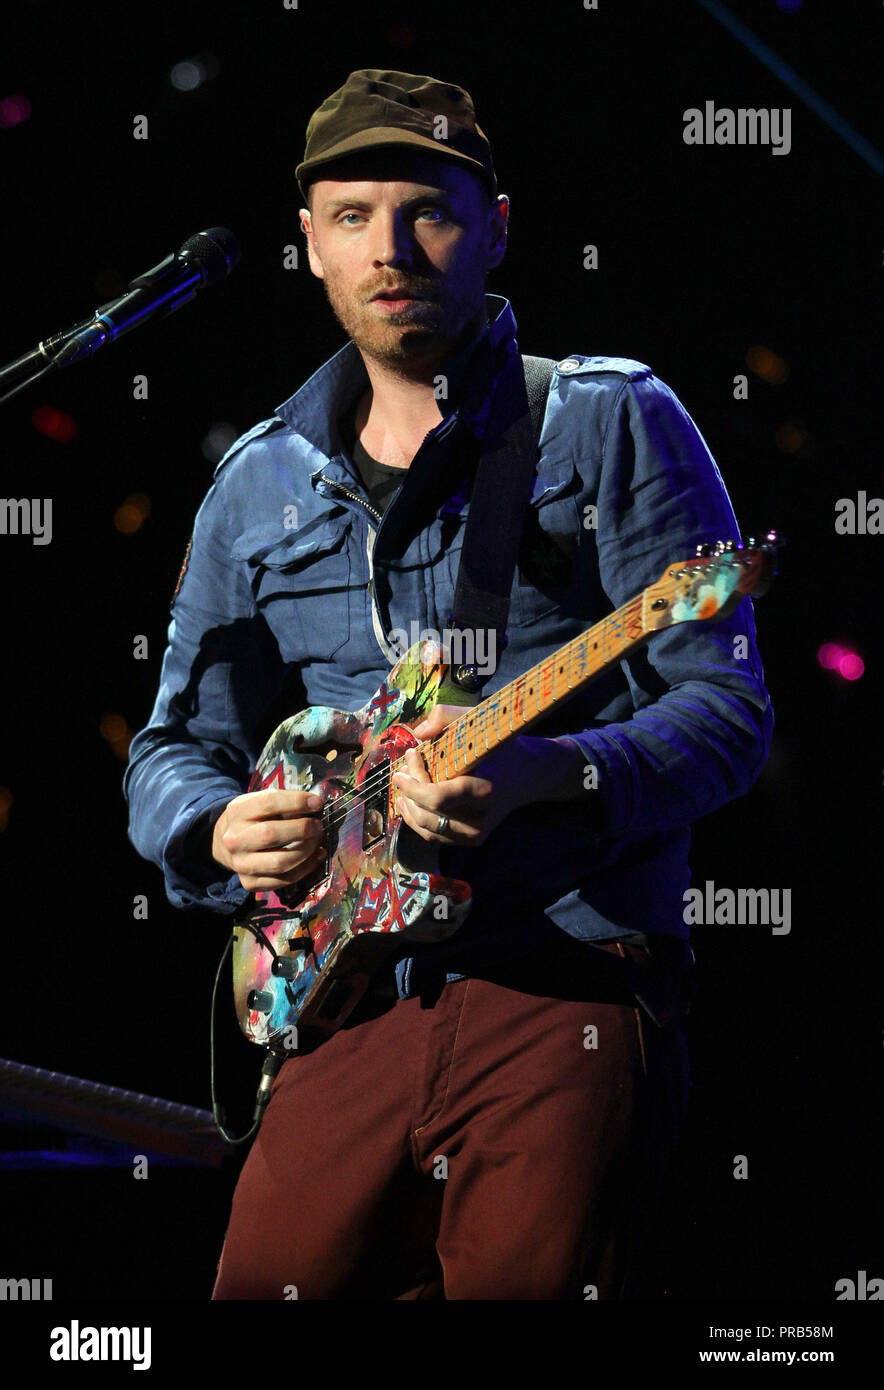 Jonny Buckland with Coldplay performs in concert on their Mylo Xyloto tour 2012 at the American Airlines Arena in Miami on June 29, 2012. Stock Photo